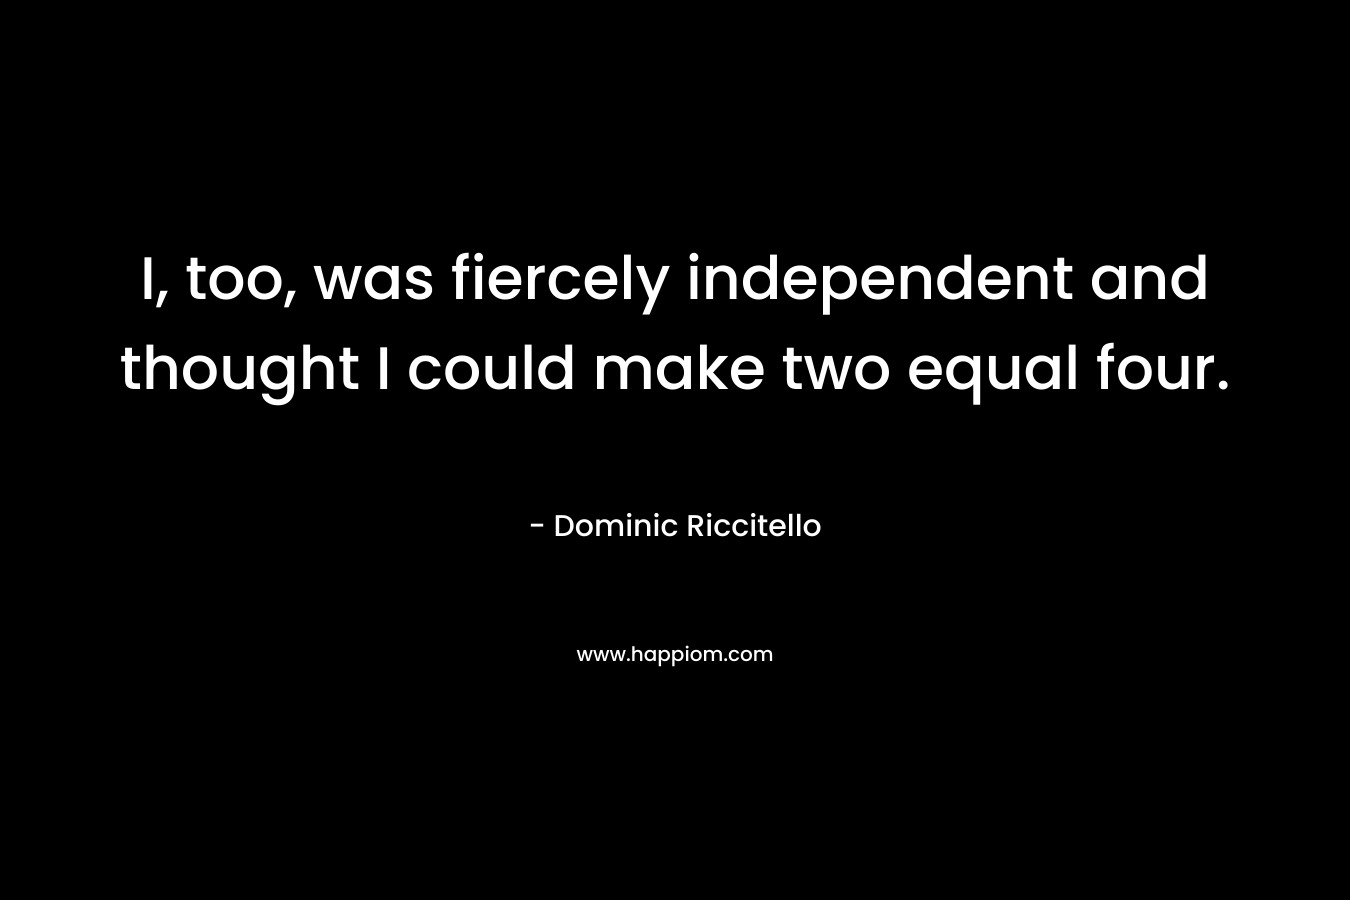 I, too, was fiercely independent and thought I could make two equal four.